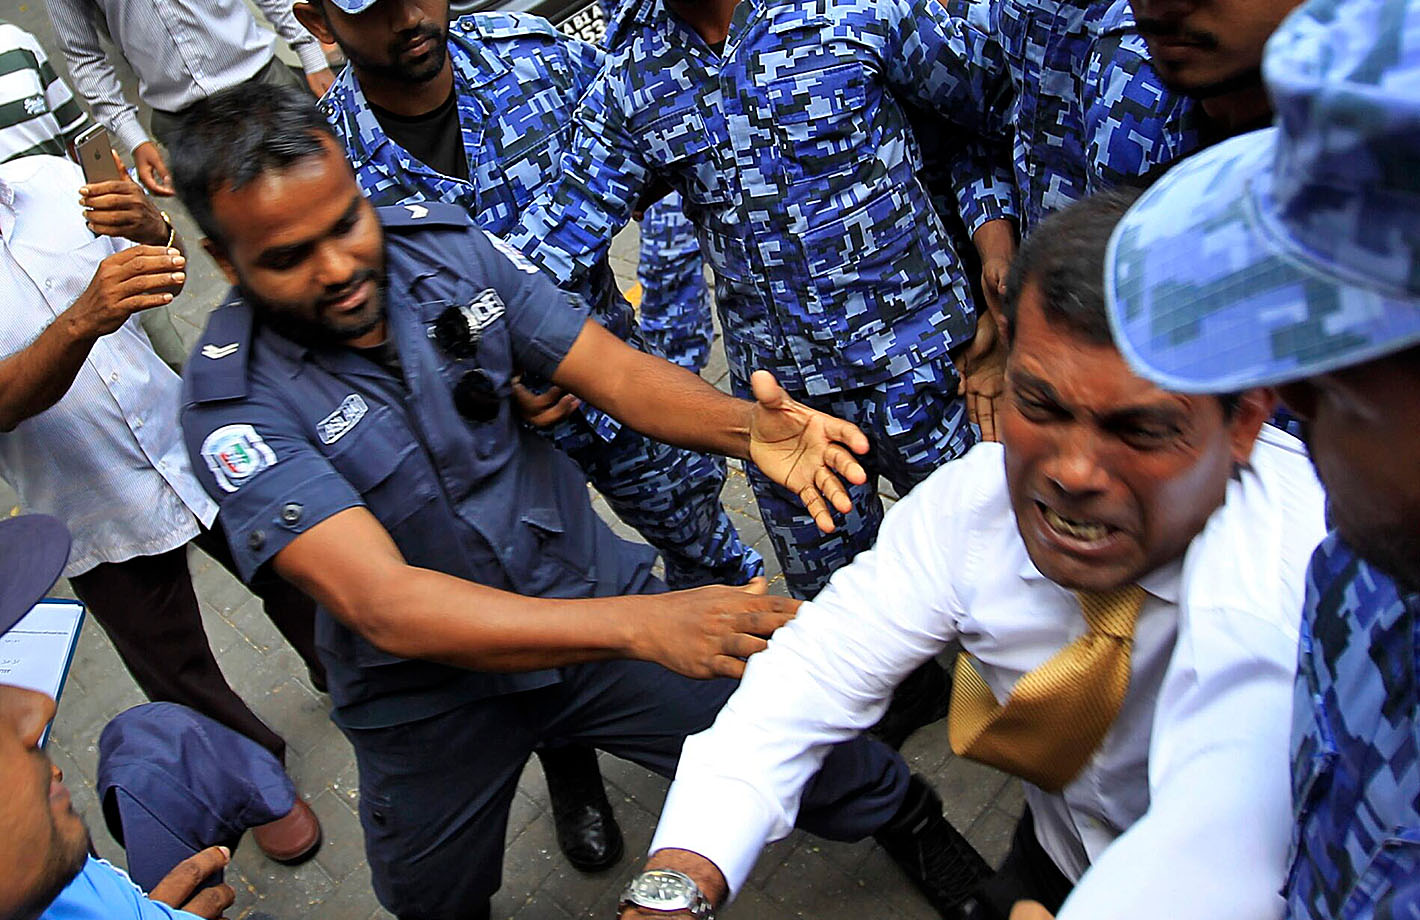 Mohamed Nasheed, former president of the Maldives, being detained.